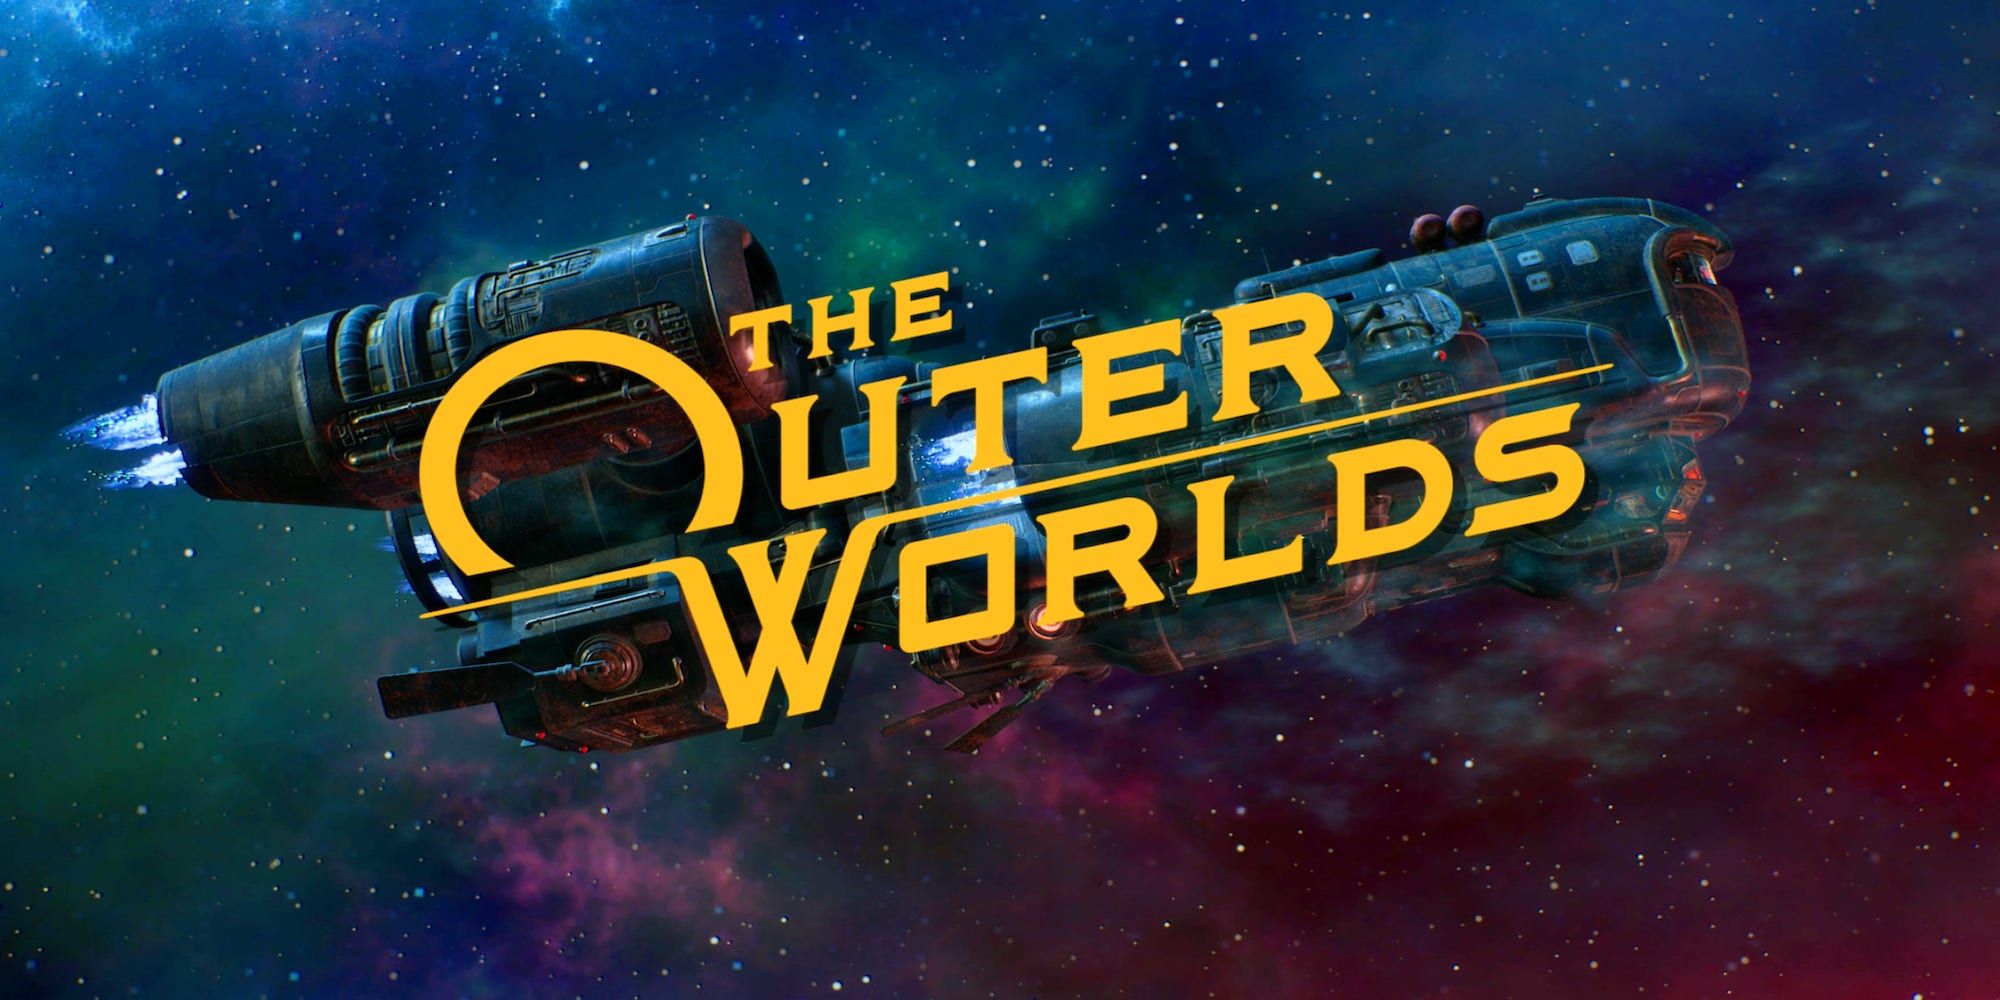 The Unreliable flies behind The Outer Worlds' logo